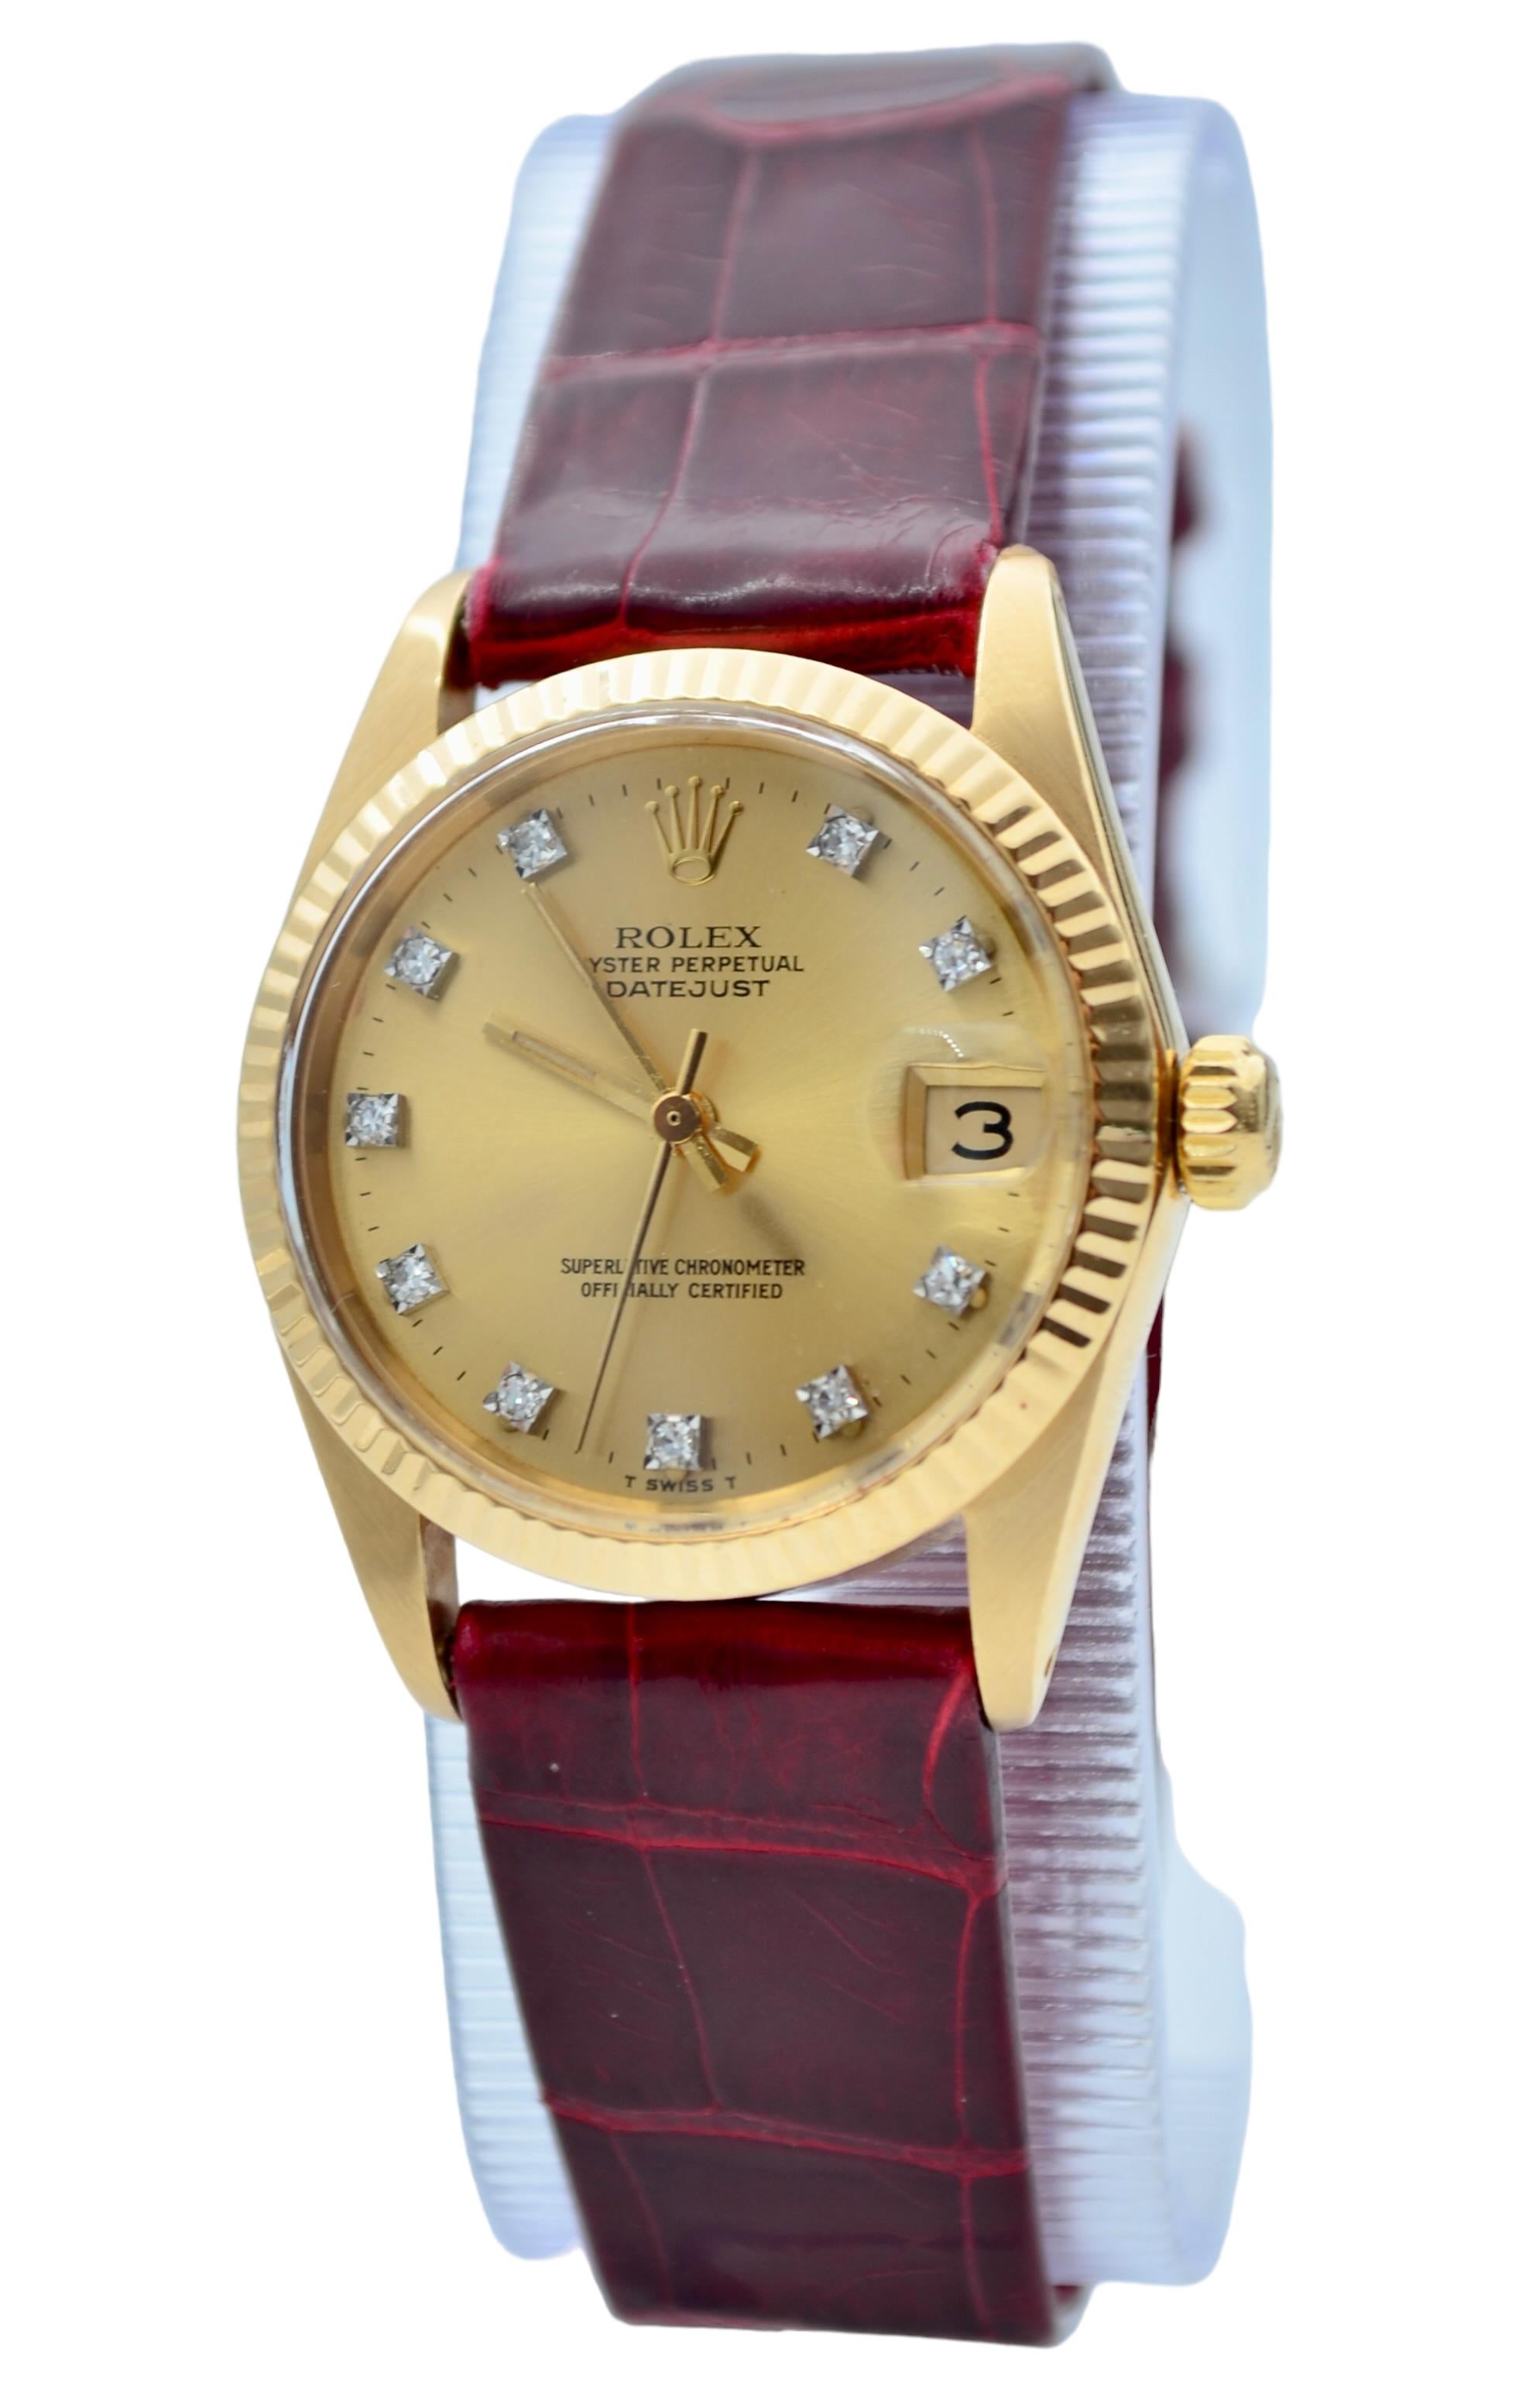 Brilliant Cut Roles Datejust 31mm Vintage 18K Yellow Gold Champagne Diamond Dial Ref: 6827